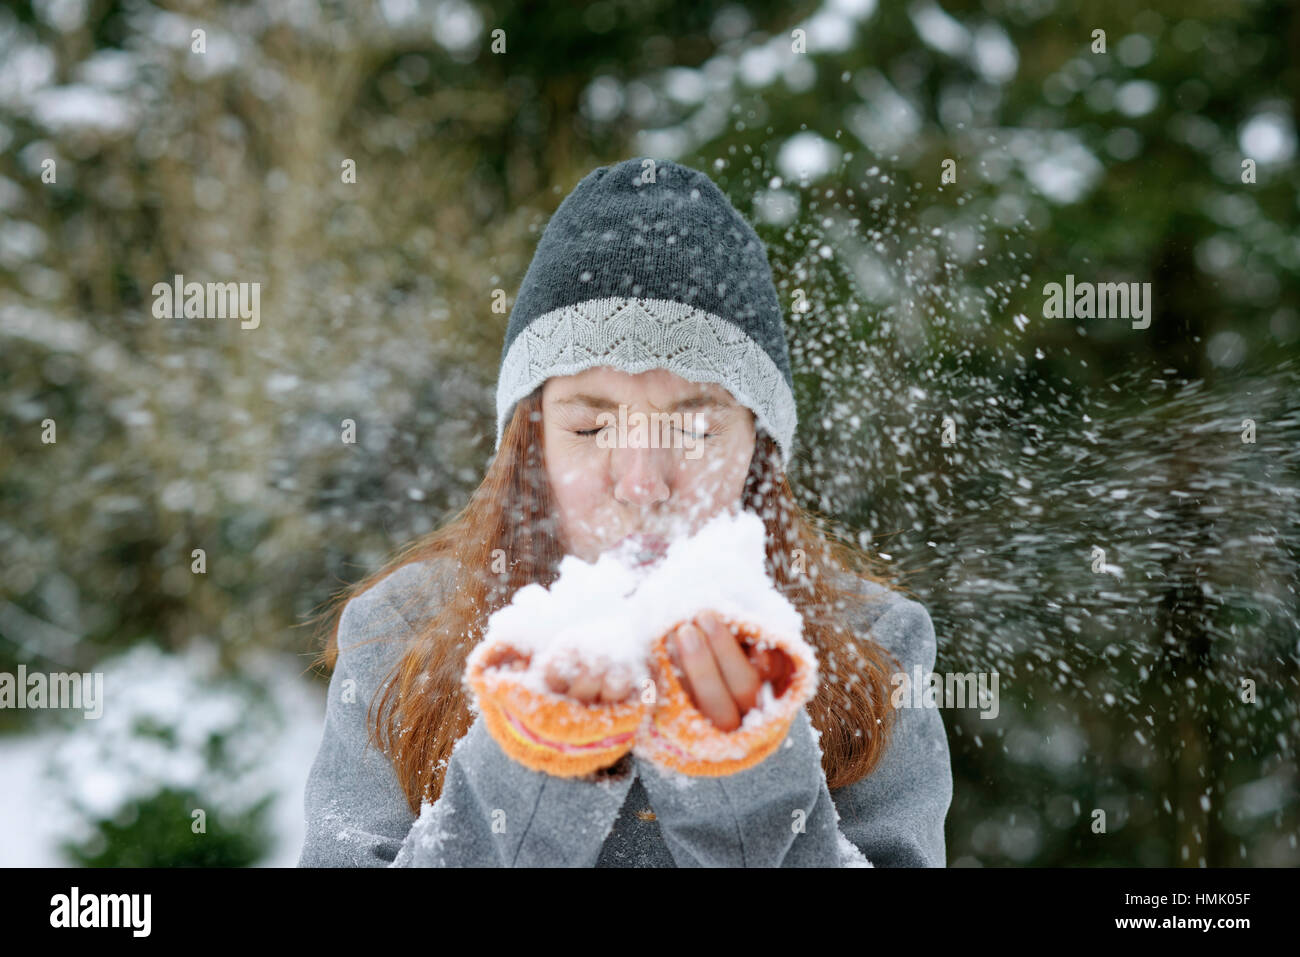 Girl blowing snow from hands, Winter, Bavaria, Germany Stock Photo